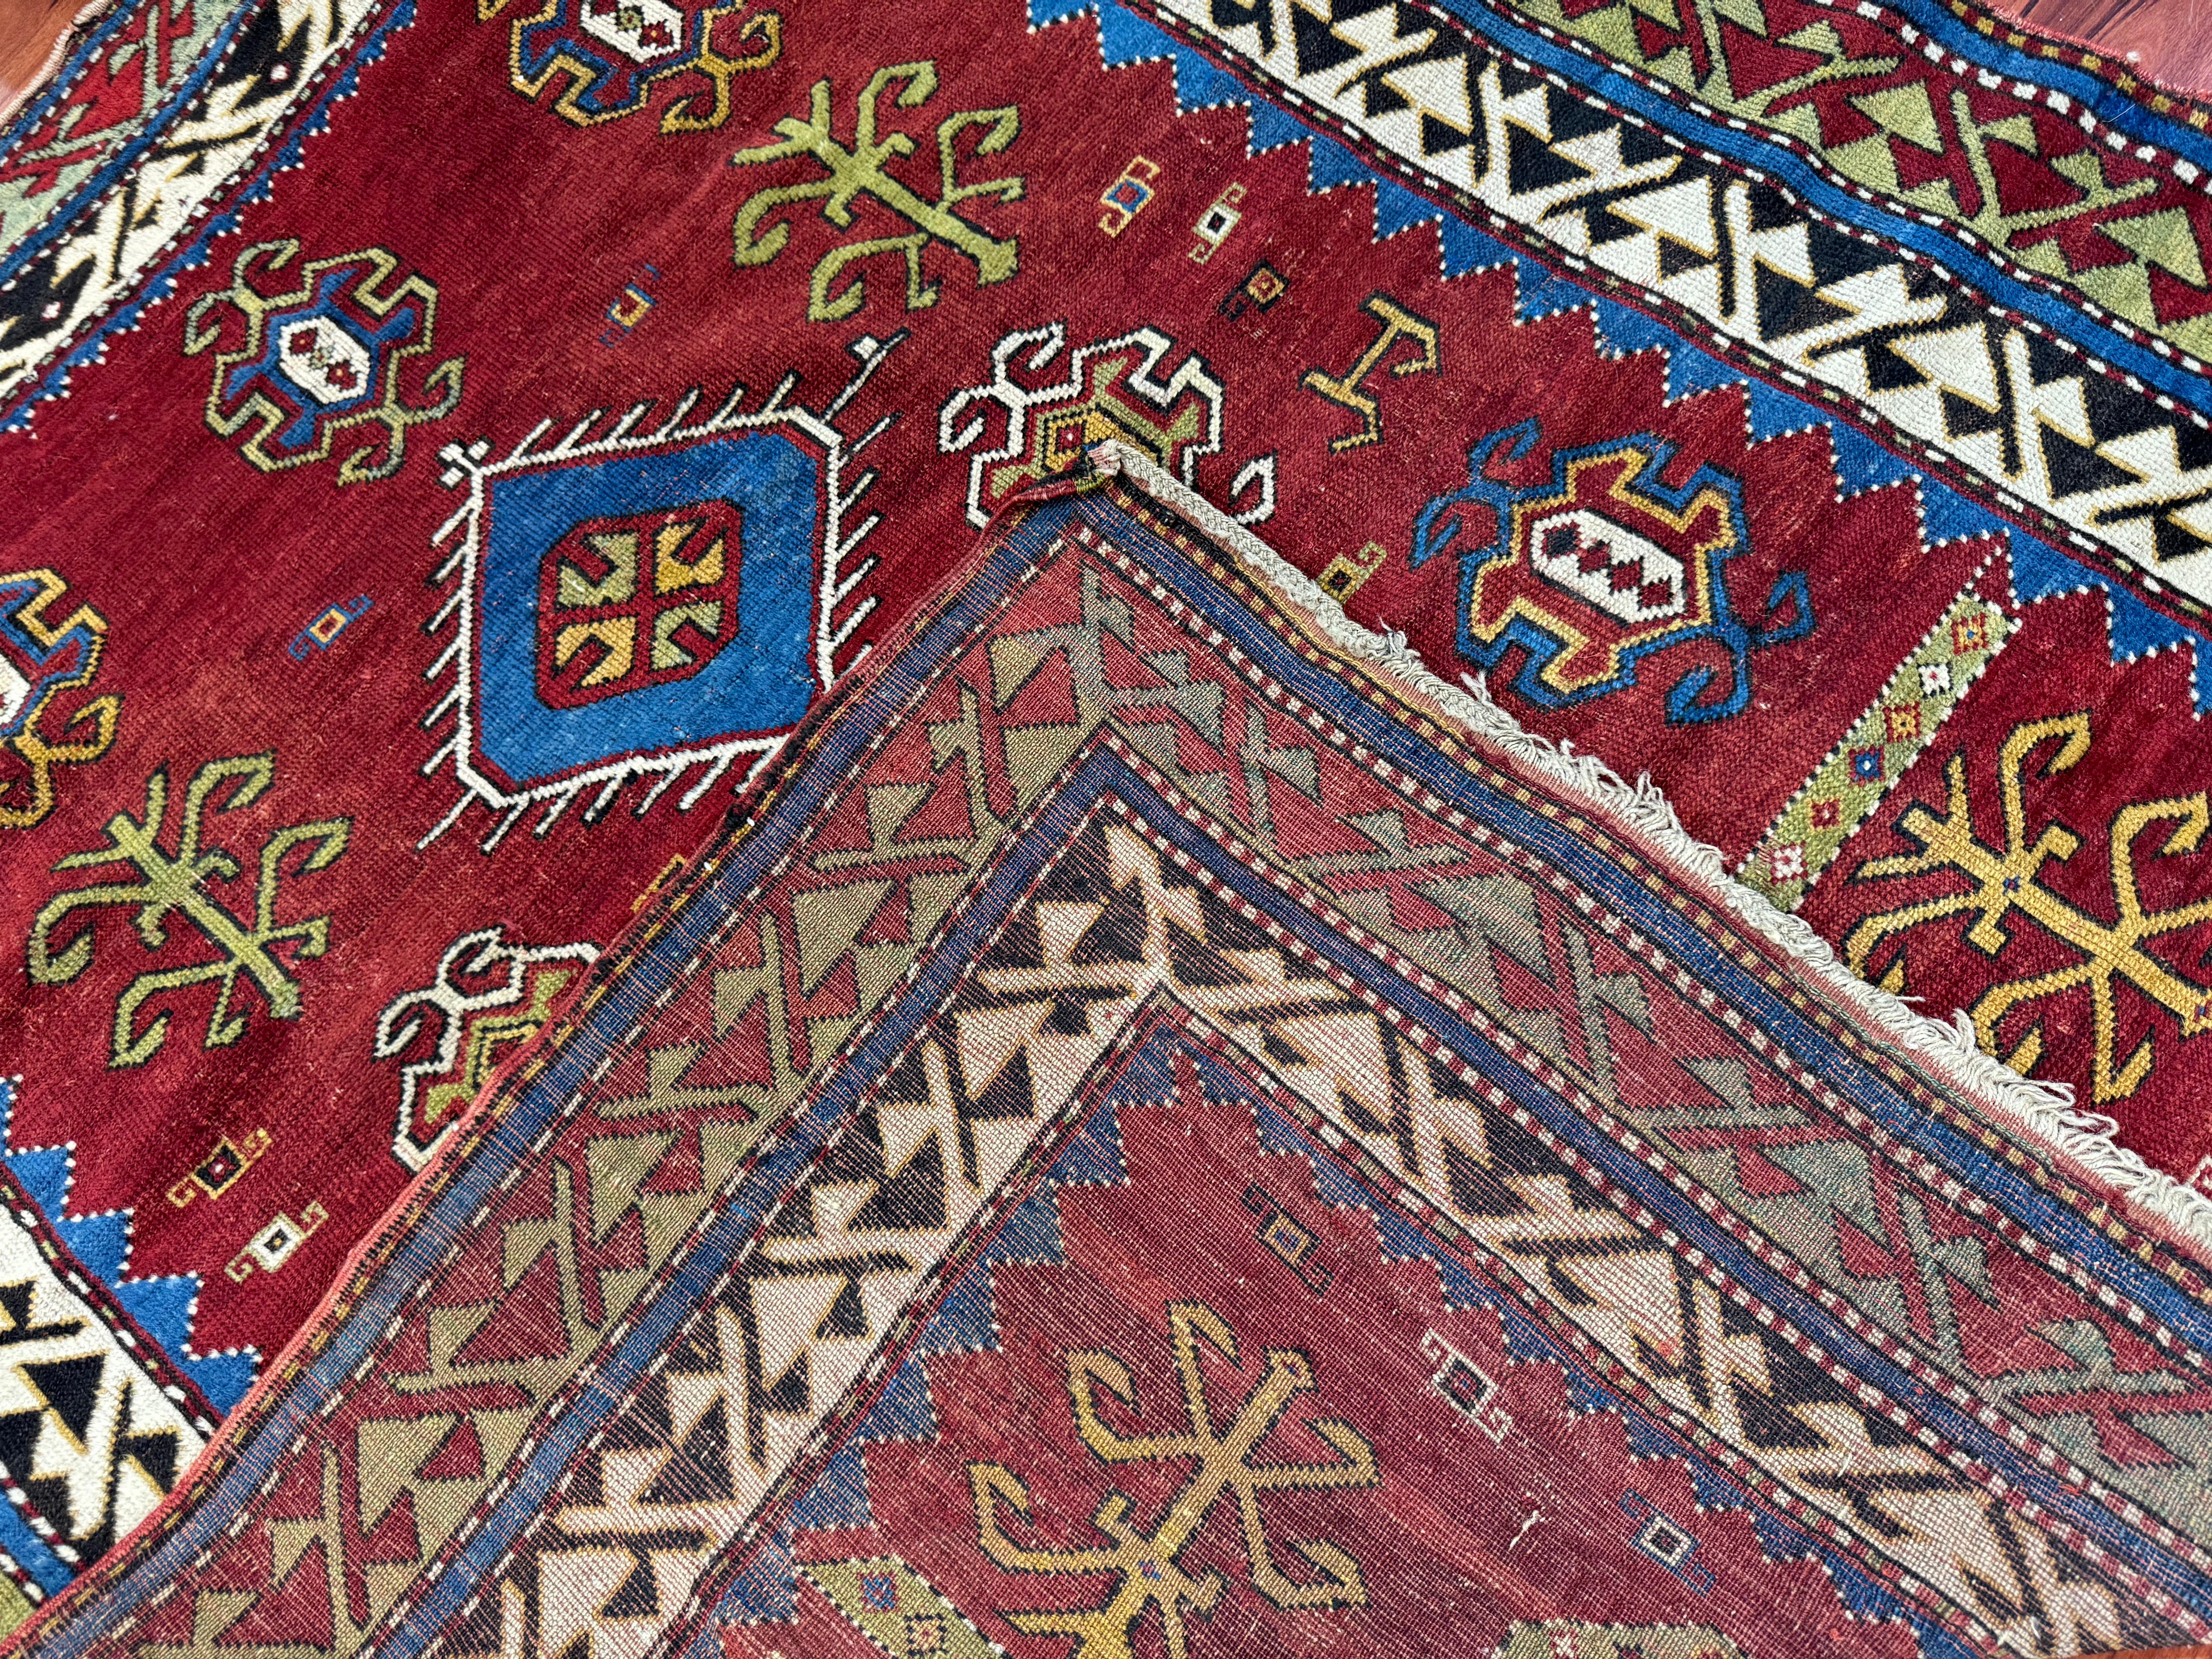 A stunning Antique Fachralo Kazak rug that measures in at 4’6” by 5’2” ft. This Rug is in excellent condition considering its rich history. Feel free to message me in regards to this listing or any other I have on my page!